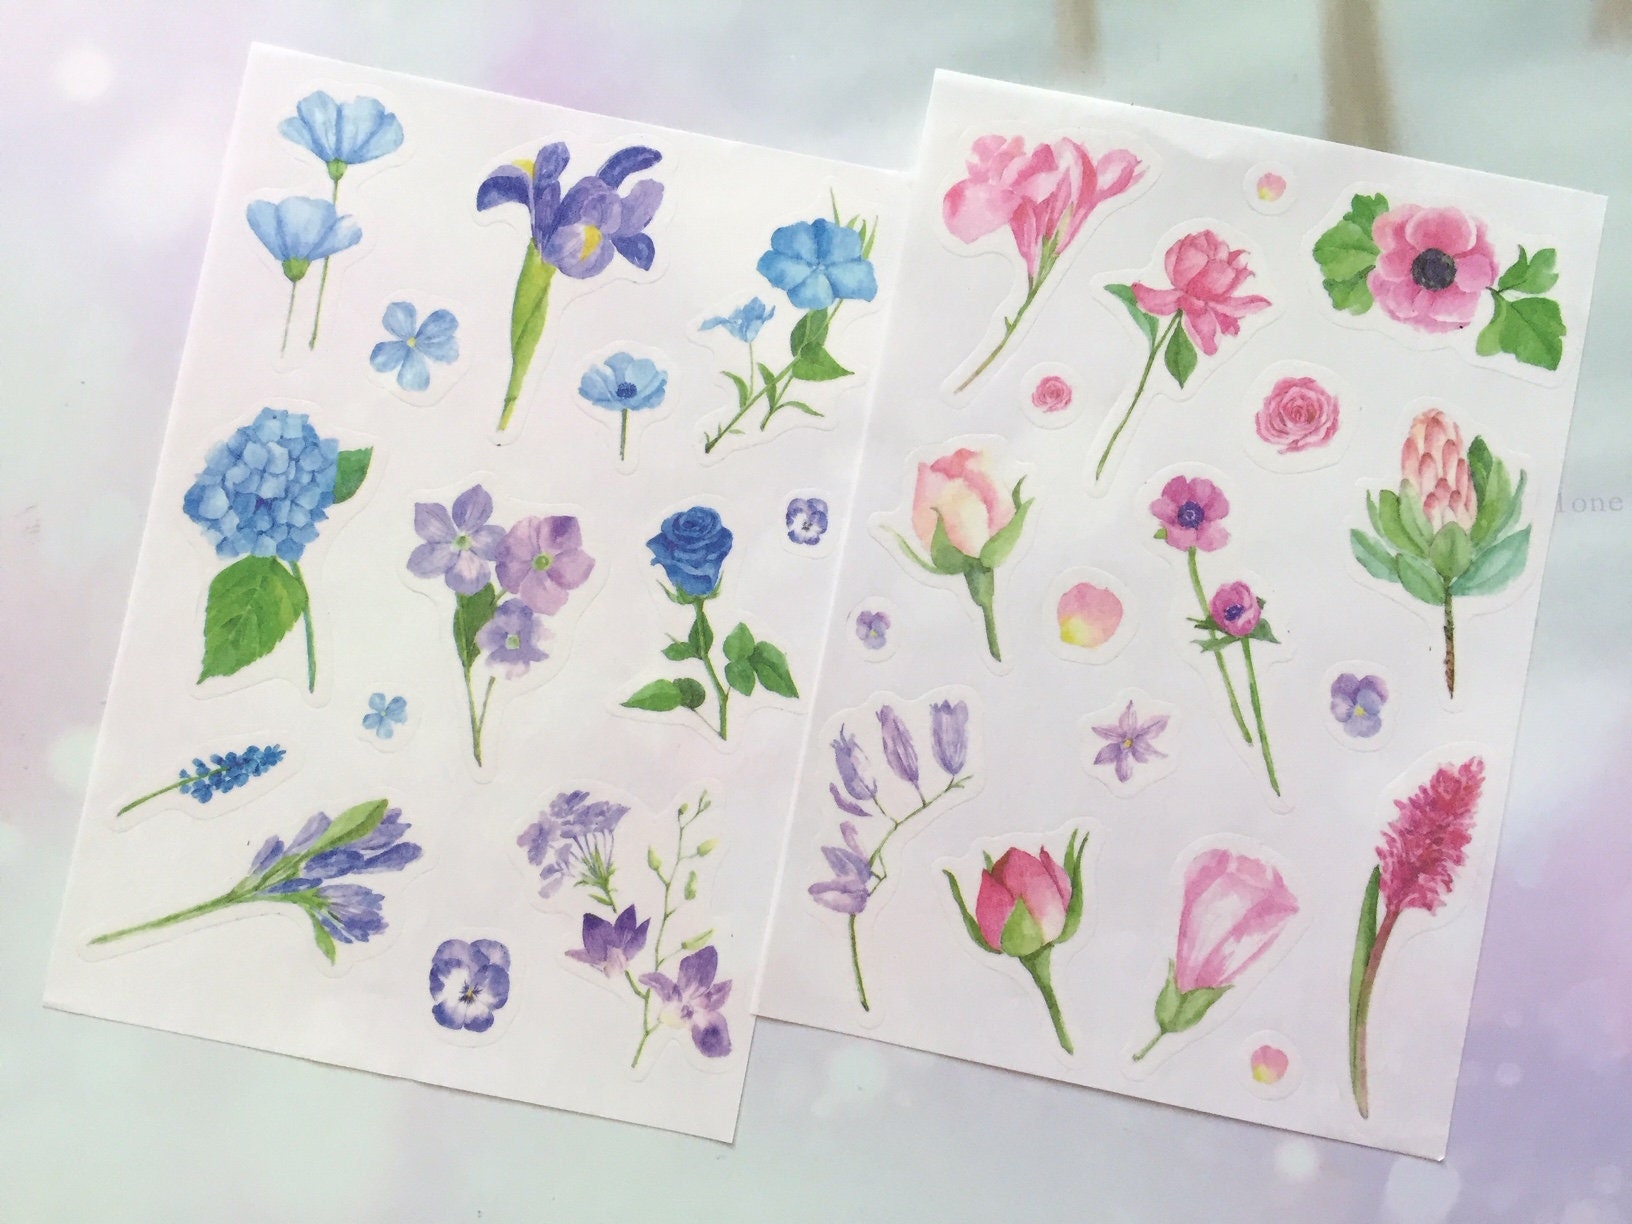 Colorful Flowers Stickers - 124 Stickers on 2 8-1/2 x 11 Sheets